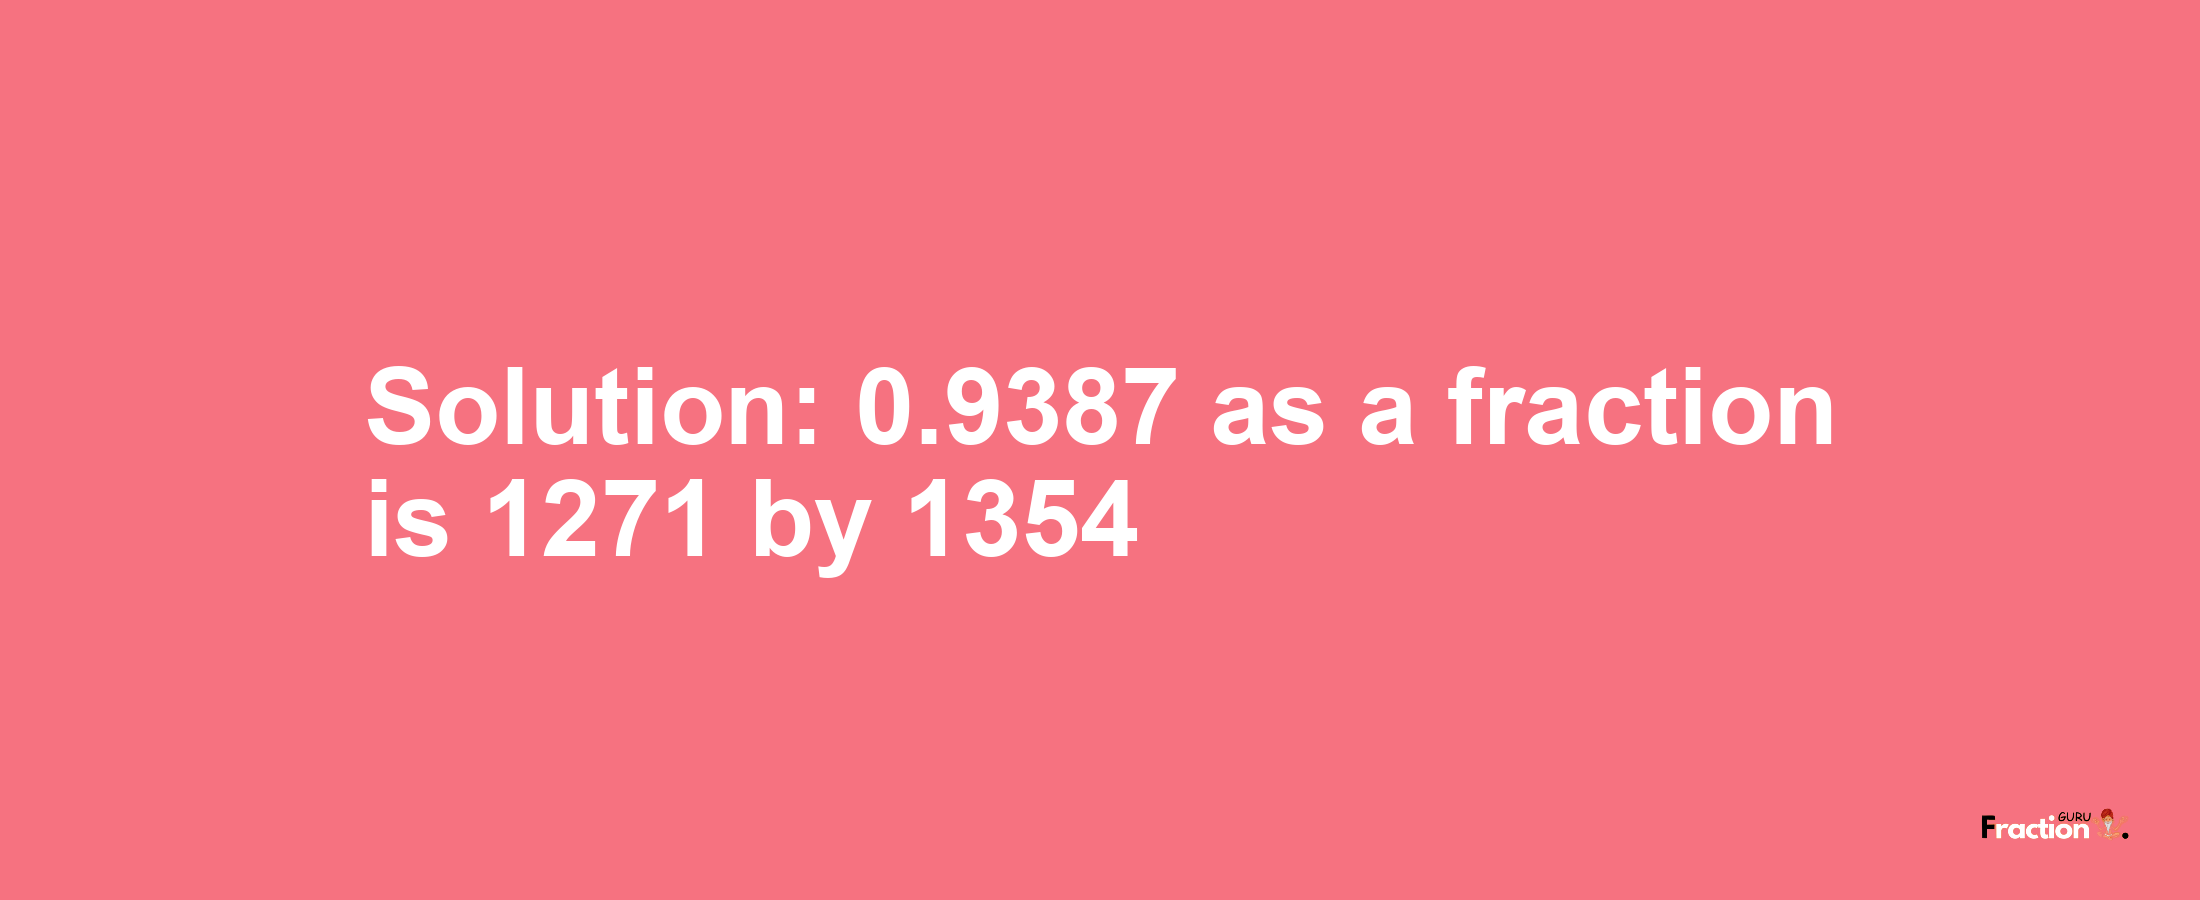 Solution:0.9387 as a fraction is 1271/1354